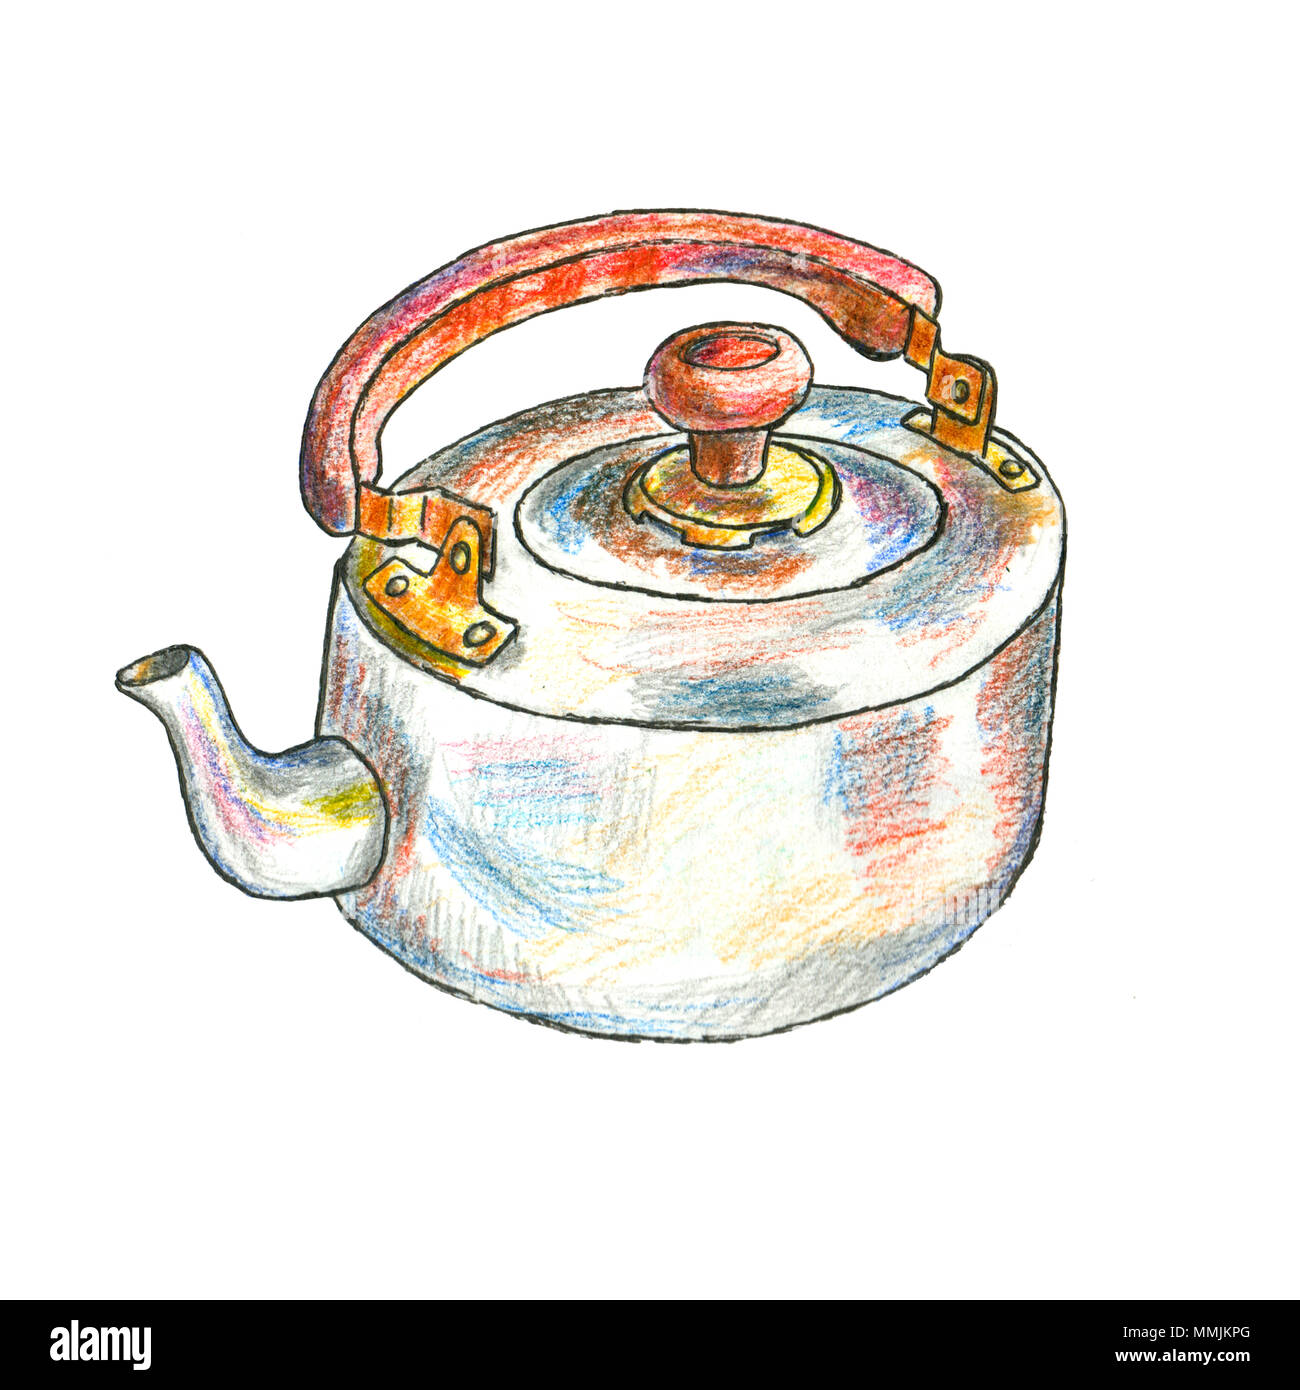 How to Draw a Kettle Step by Step  EasyLineDrawing